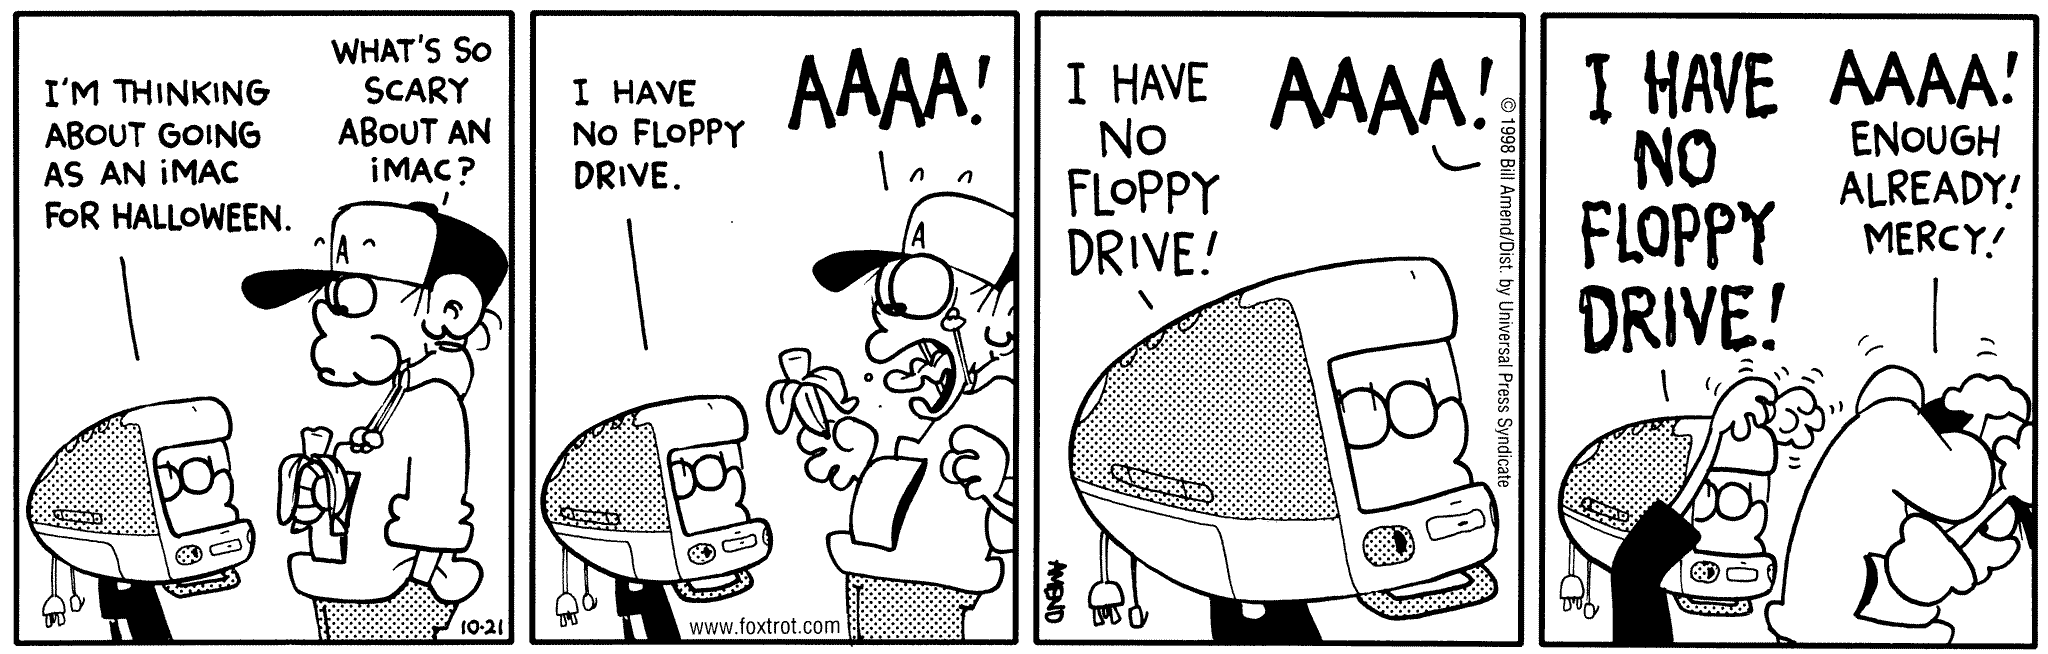 Halloween Comics - FoxTrot comic strip by Bill Amend - Published October 21, 1998 - Jason Fox: I'm thinking about going as an iMac for Halloween. Peter Fox: What's so scary about an iMac? Jason Fox: I have no floppy drive. Peter Fox: AAAA! Jason Fox: I have no floppy drive. Peter Fox: AAAA! Jason Fox: I have no floppy drive! Peter Fox: AAAA! Enough already! Mercy!